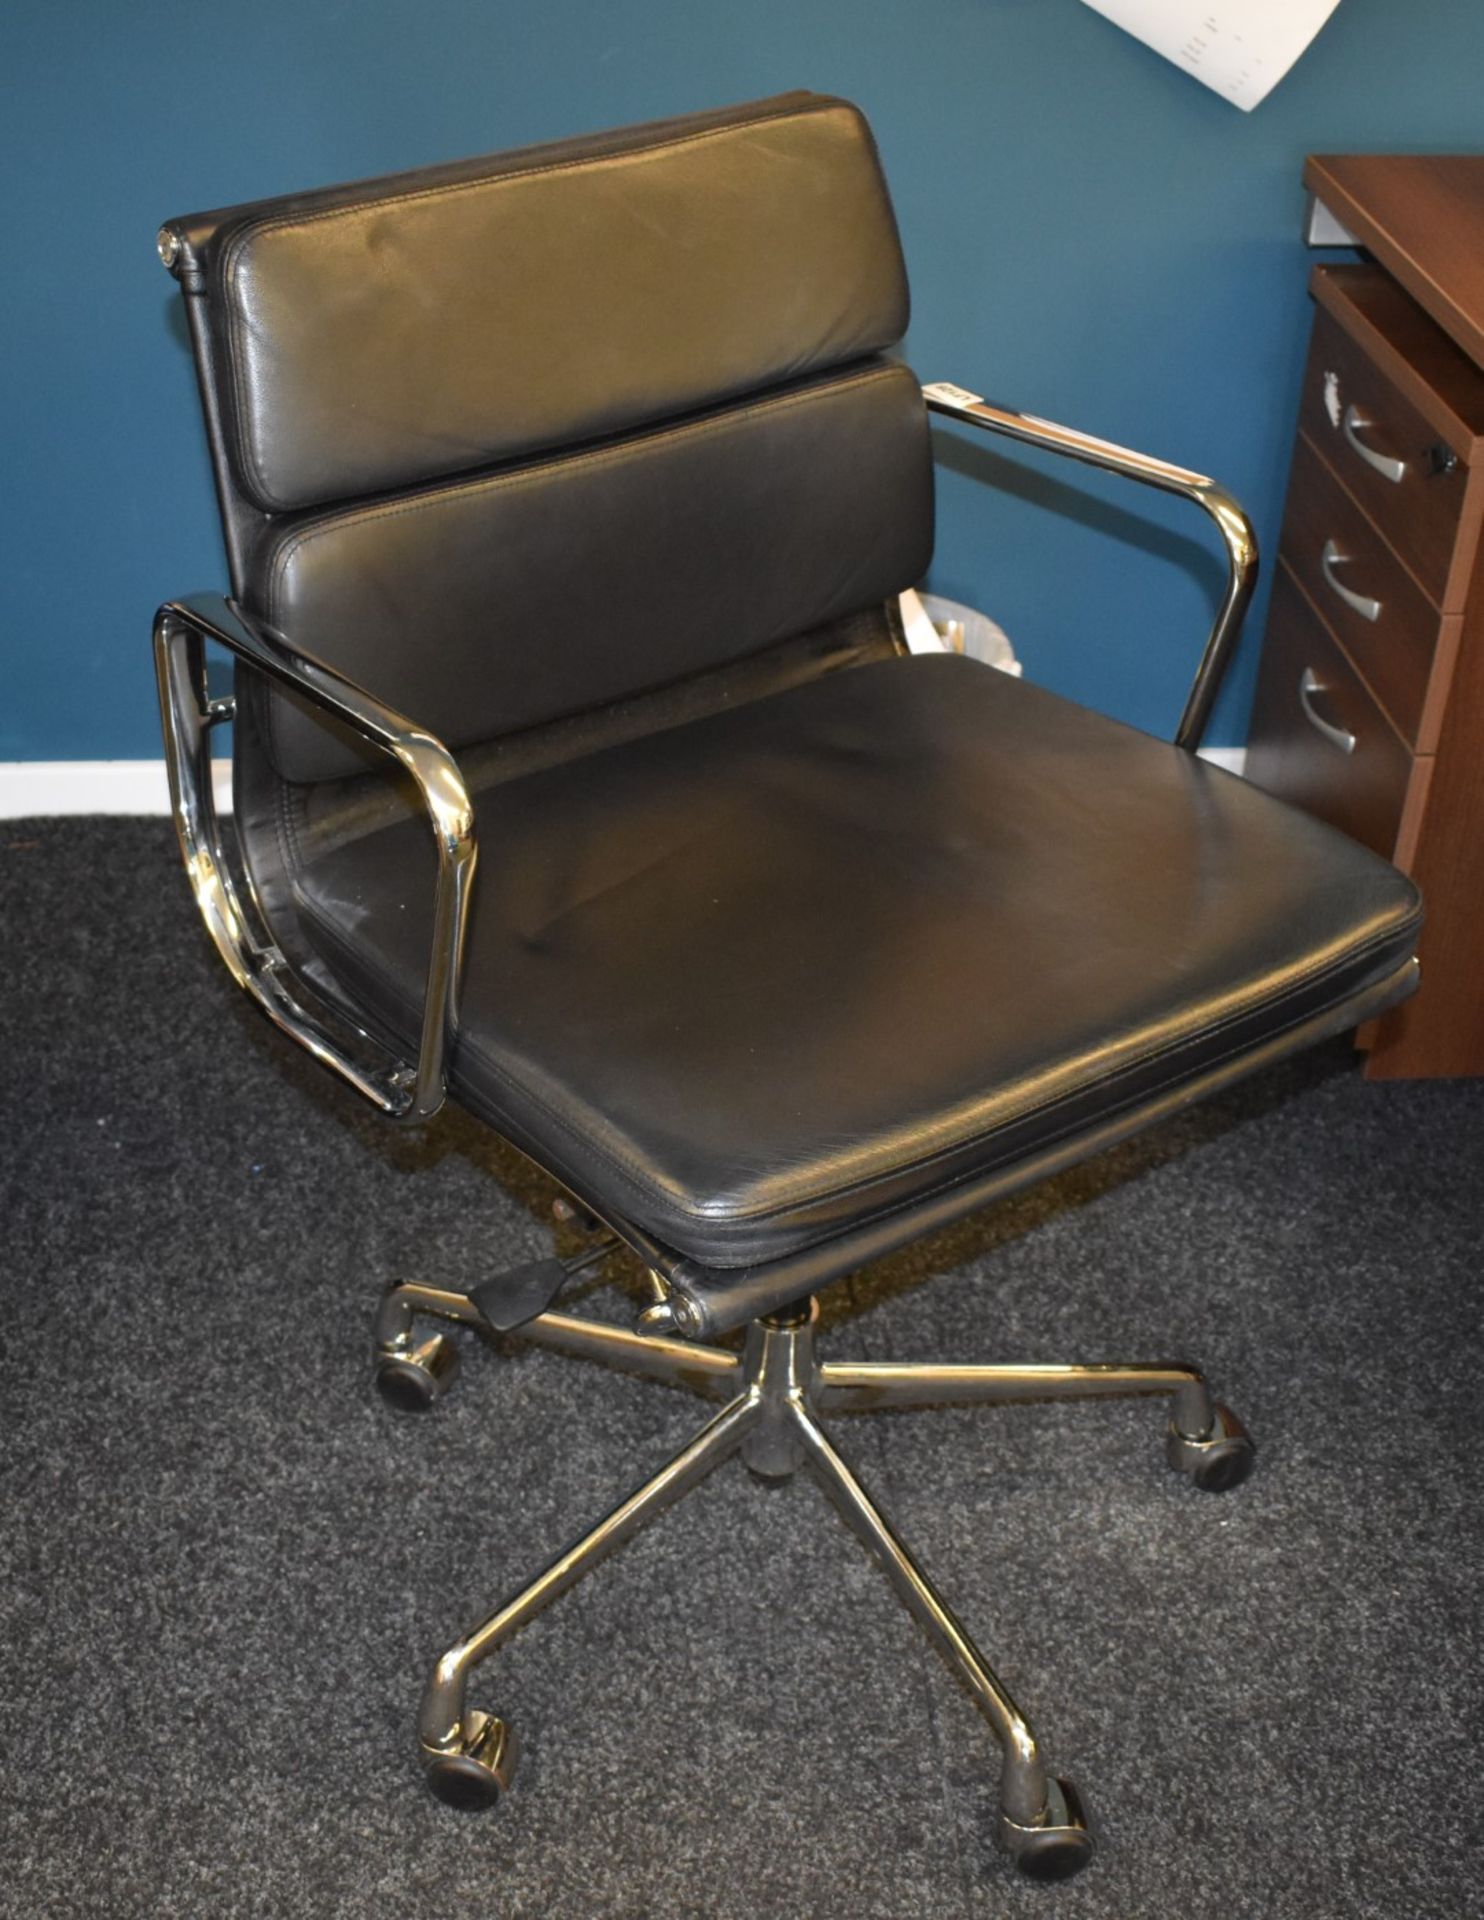 1 x Eames Inspired Office Chair - Swivel Office Chair Upholstered in Black Leather - Image 2 of 4